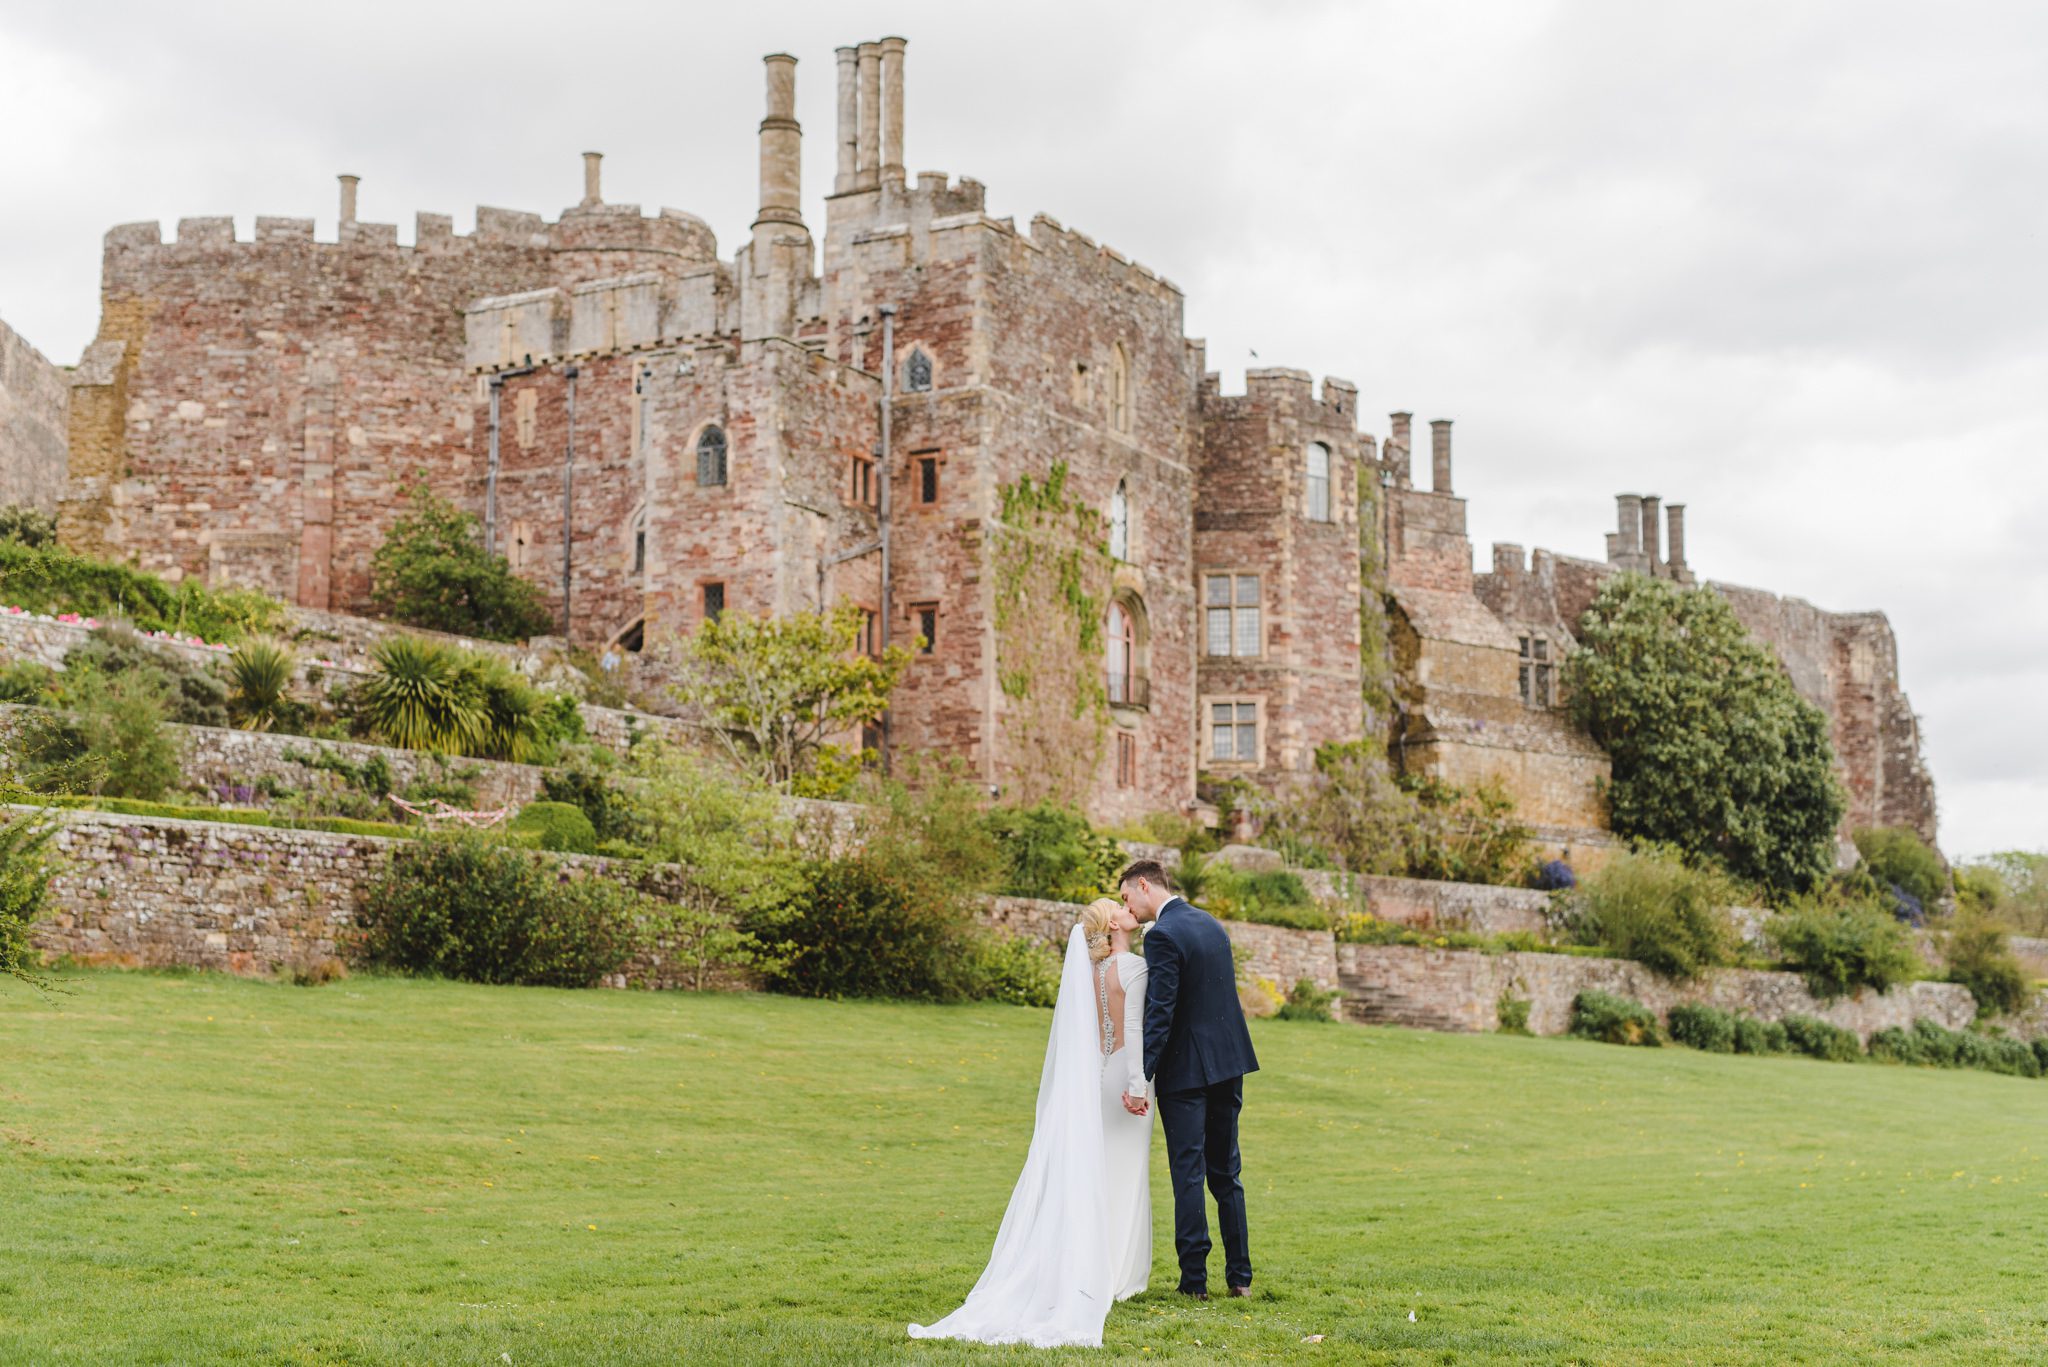 A couple kissing with Berkeley Castle in the background